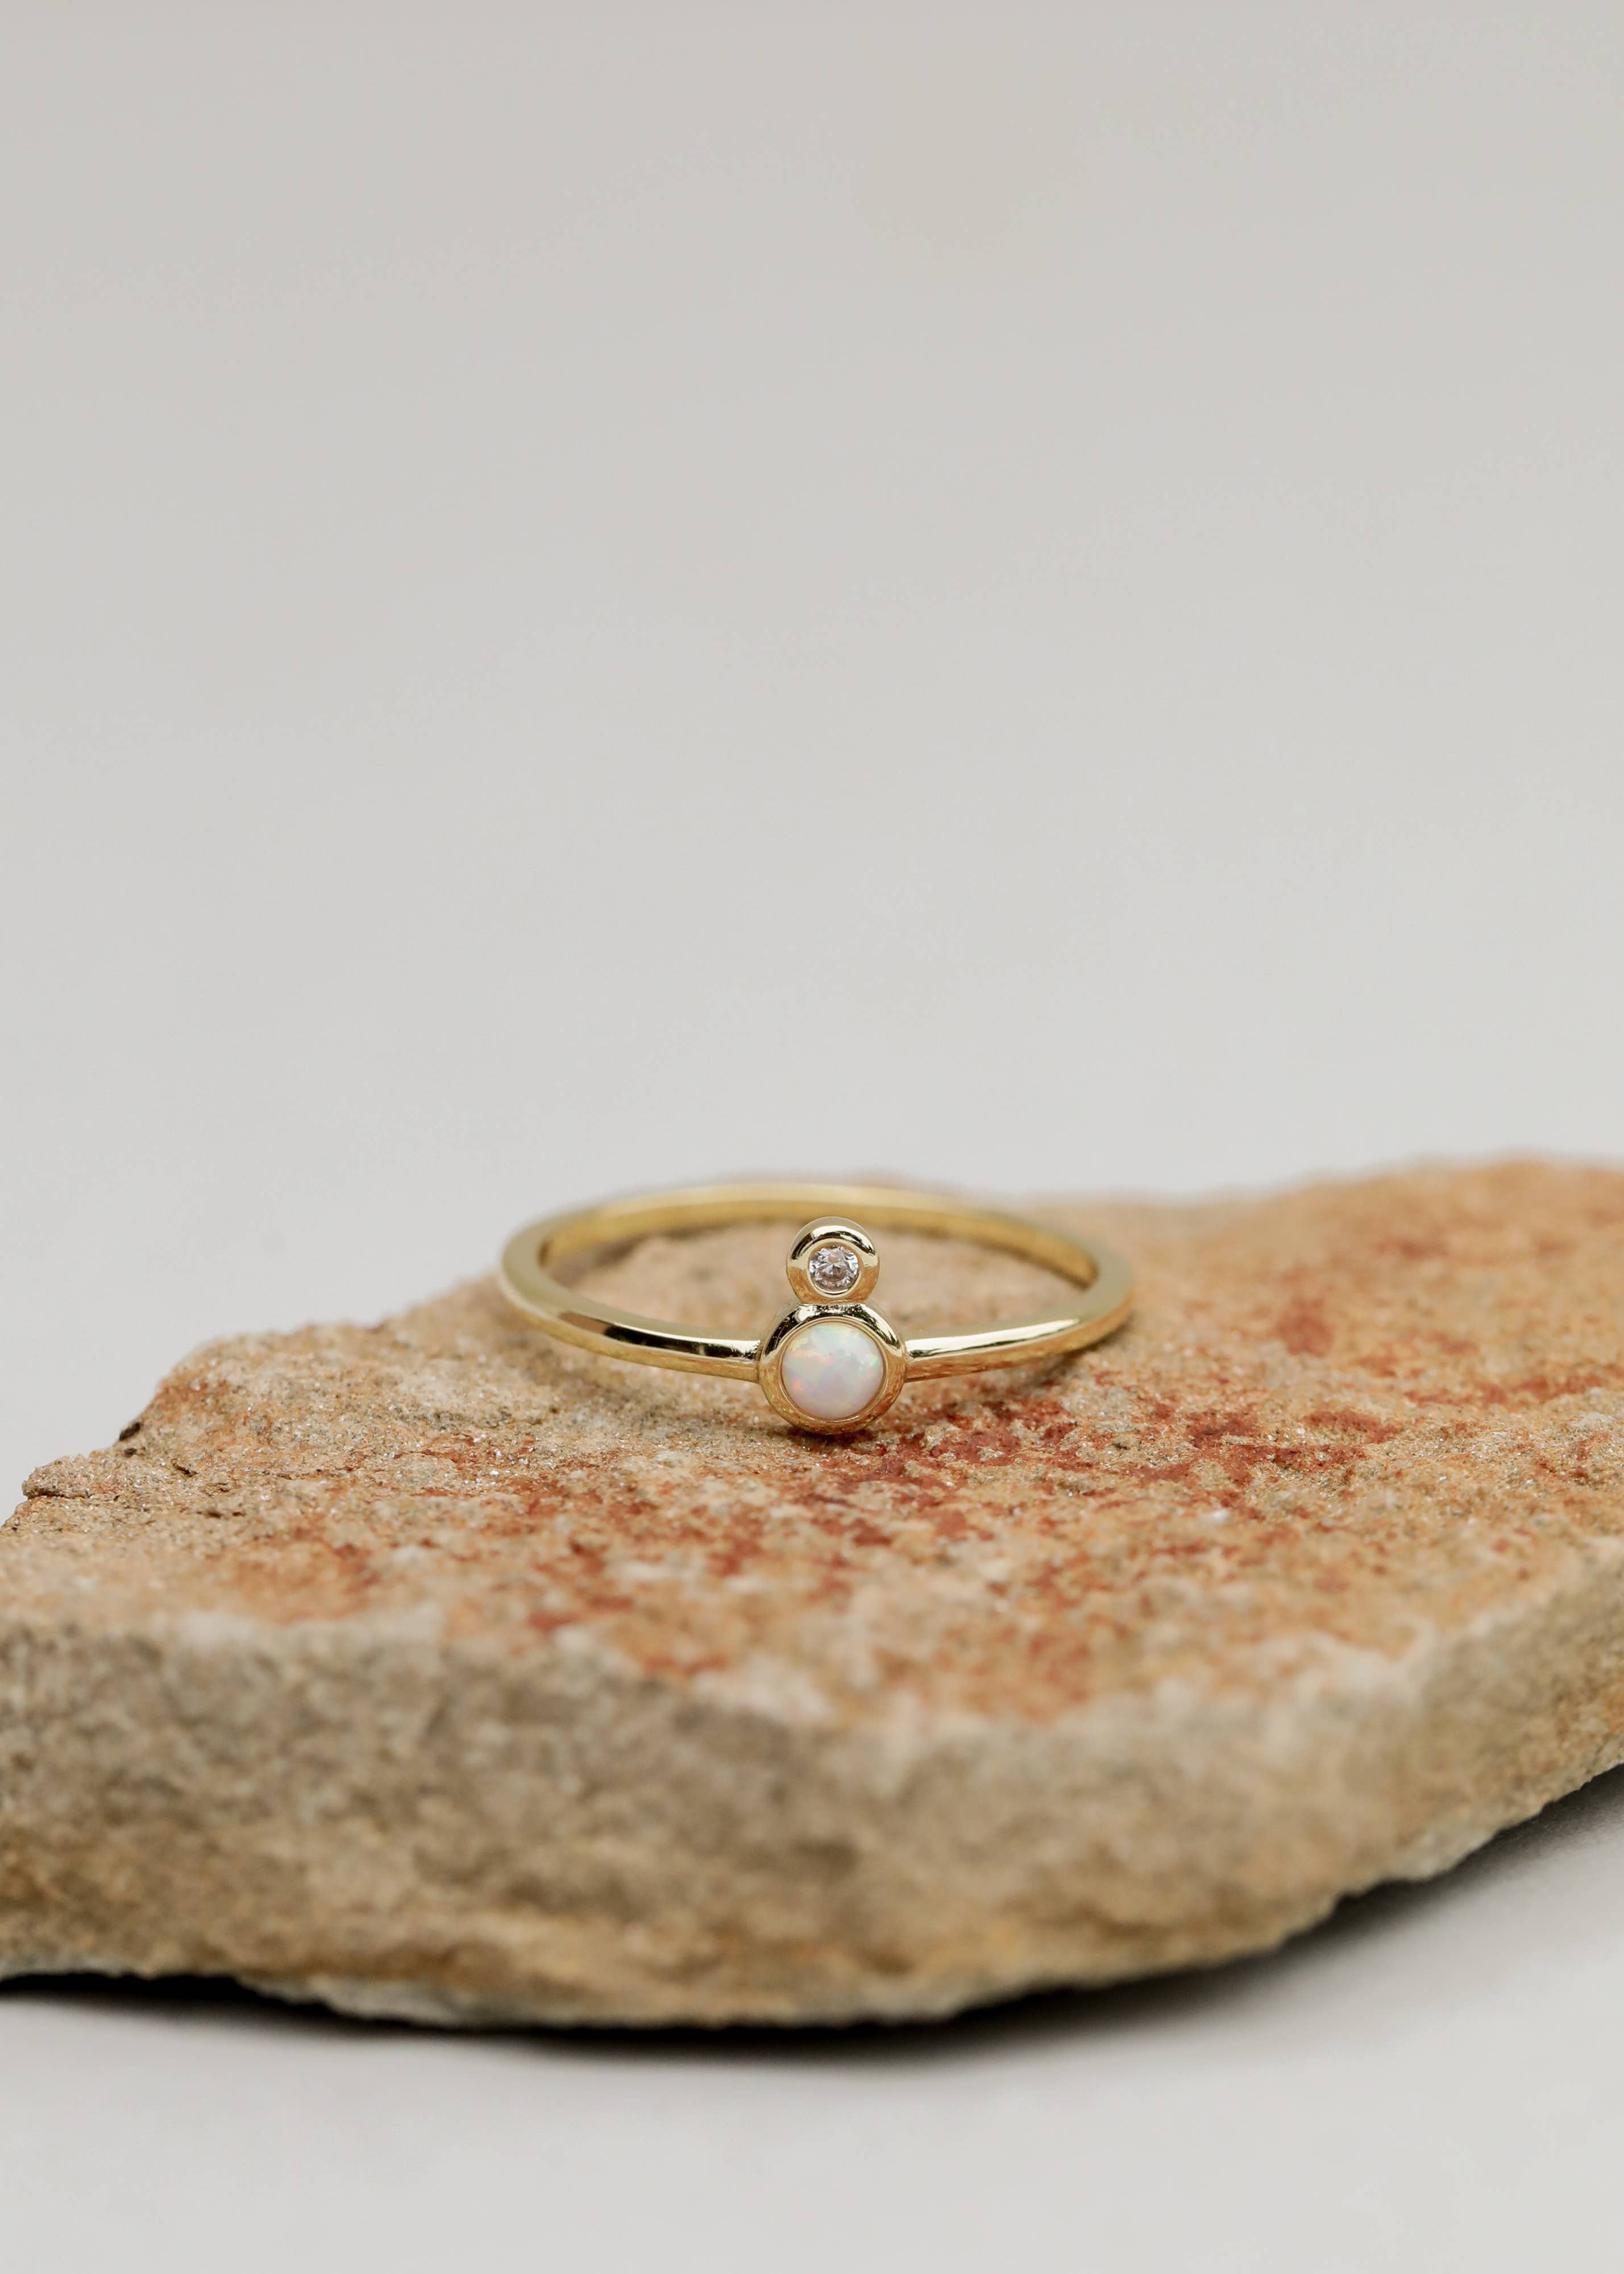 Opal Infinity Ring by JaxKelly. Opal and CZ ring. Crown chakra ring. Dainty stacking ring. Gold stacking ring. Minimal gold ring. Gold dainty ring.